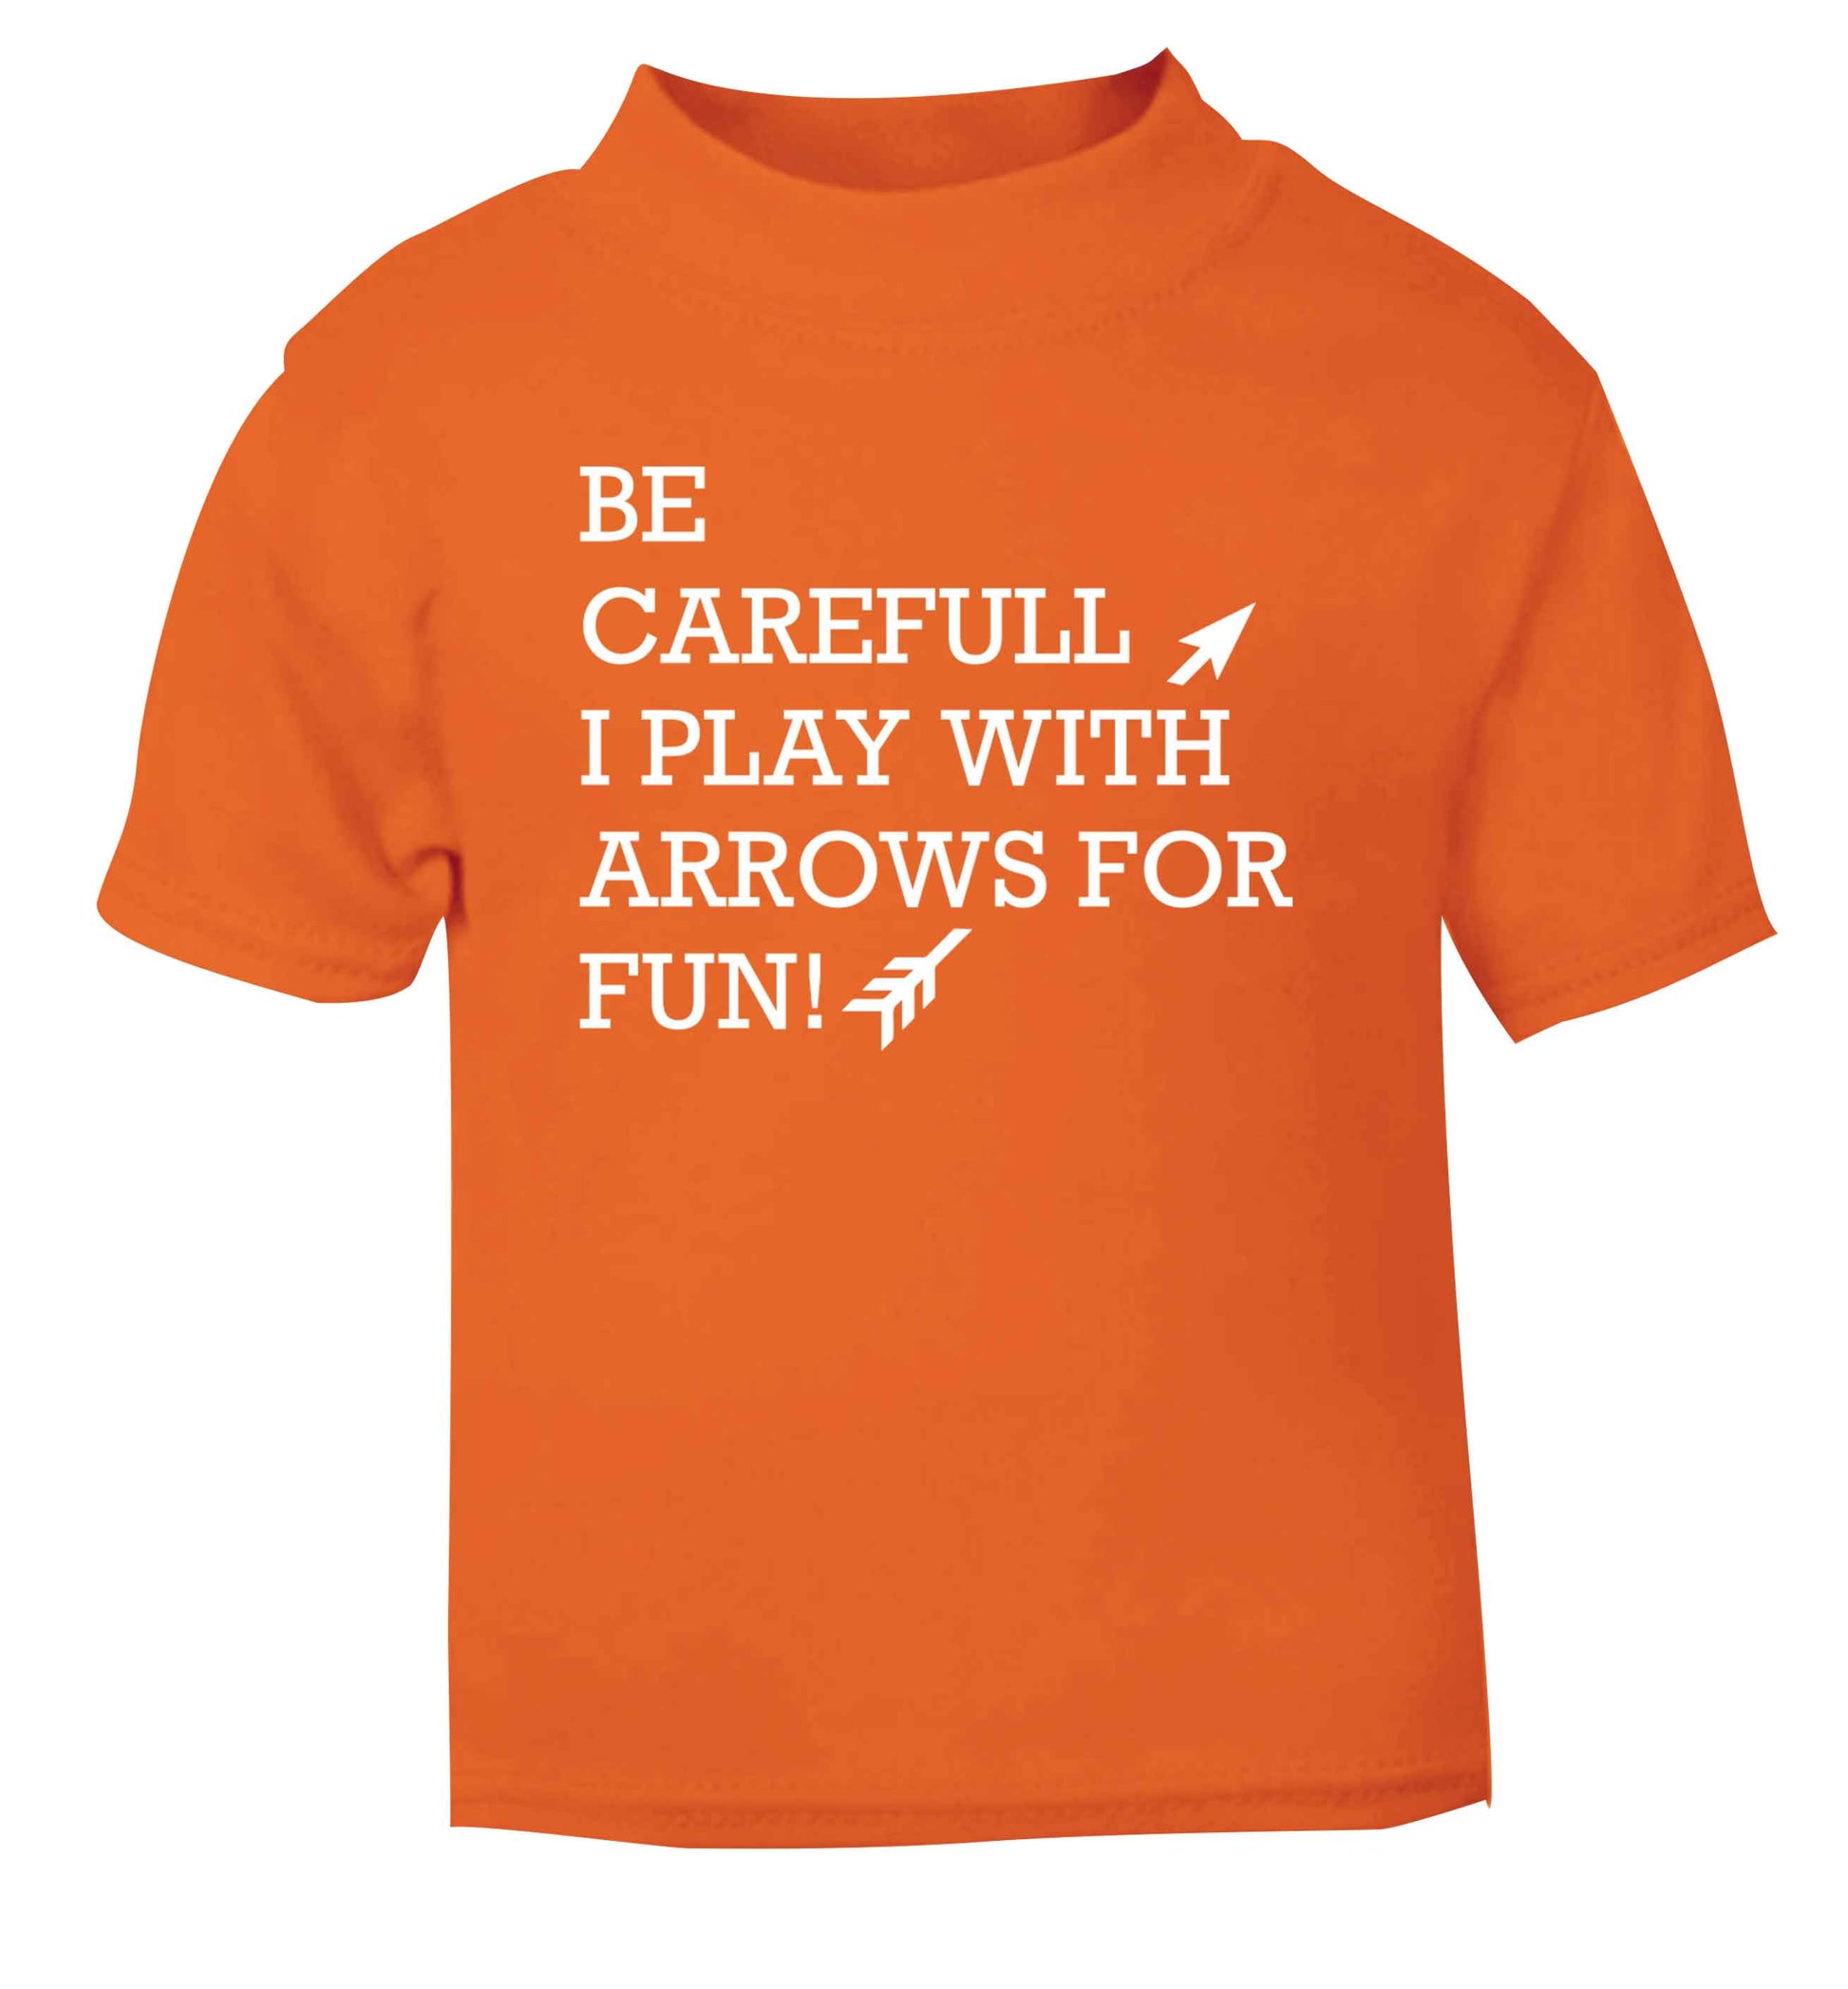 Be carefull I play with arrows for fun orange Baby Toddler Tshirt 2 Years